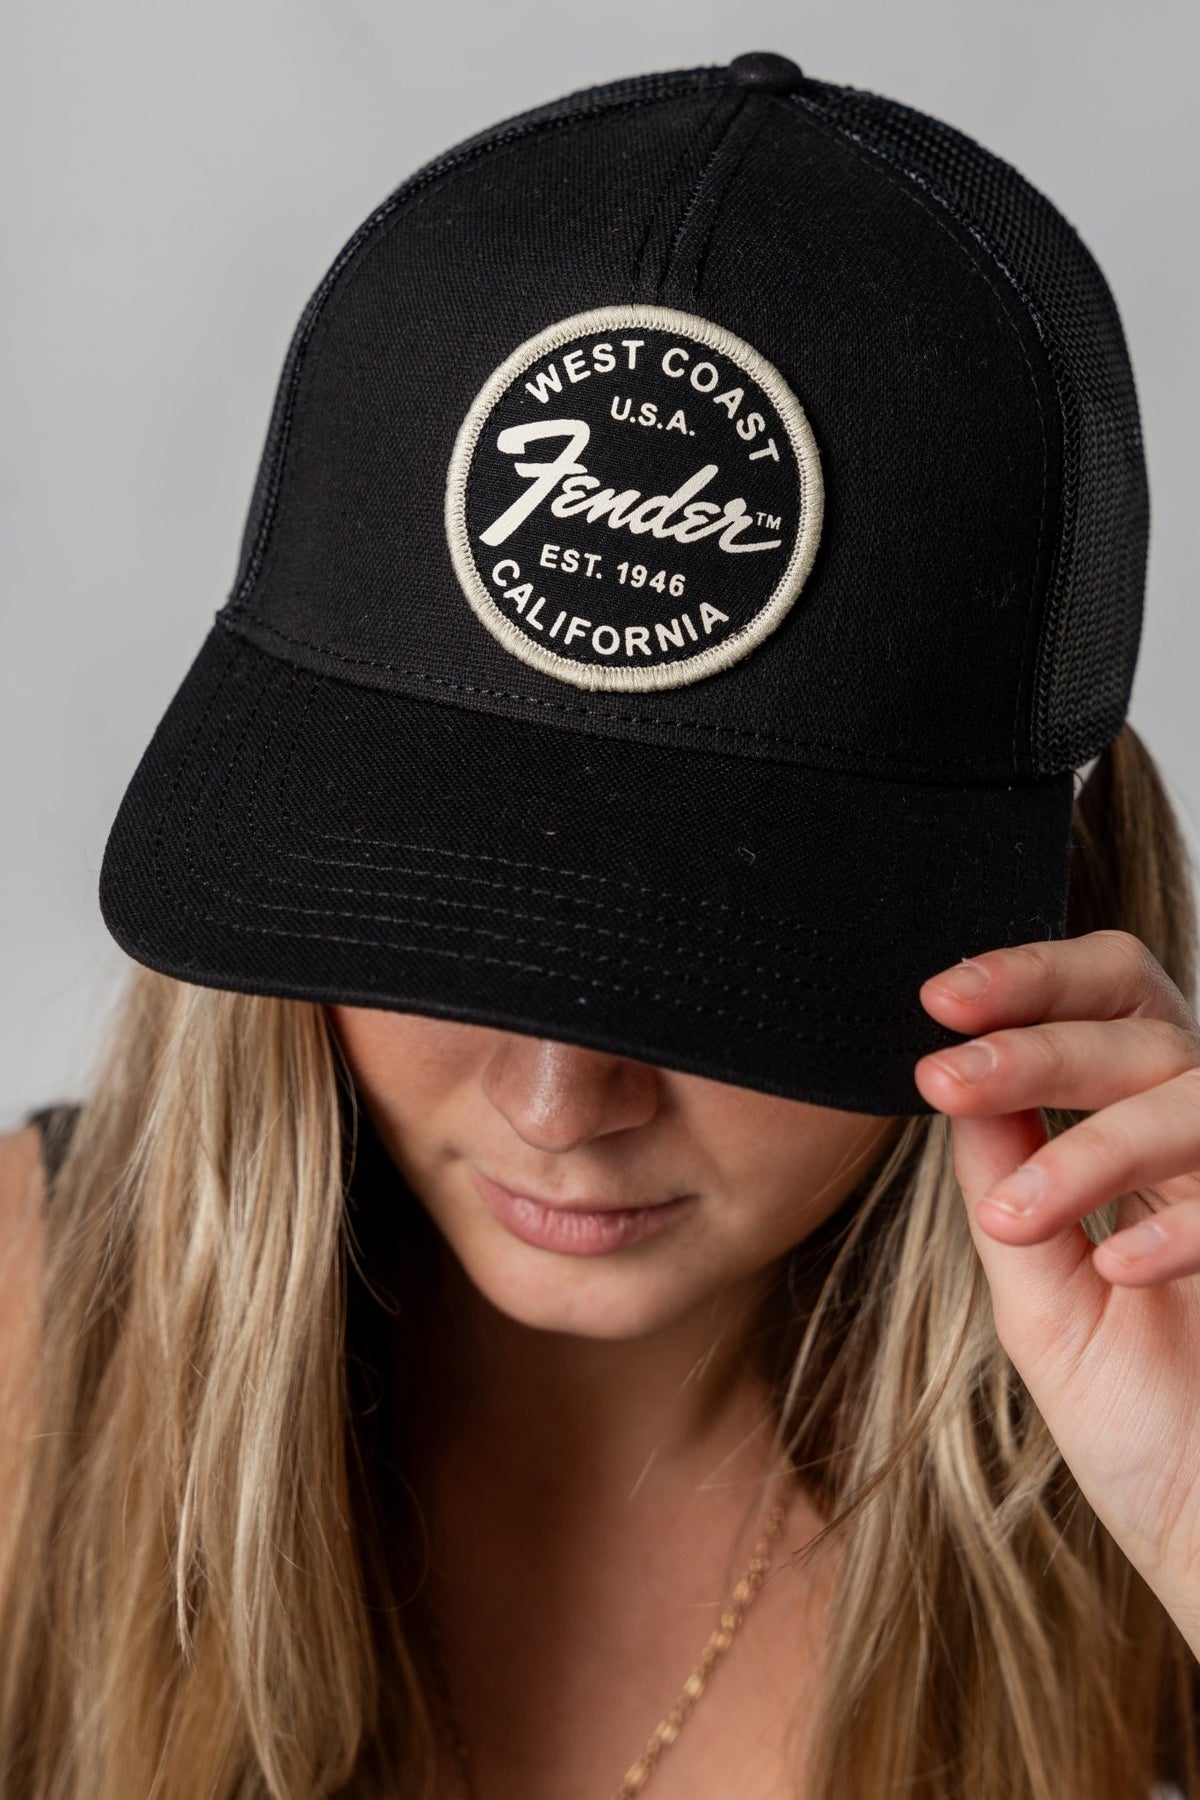 Fender valin hat black - Trendy Gifts at Lush Fashion Lounge Boutique in Oklahoma City